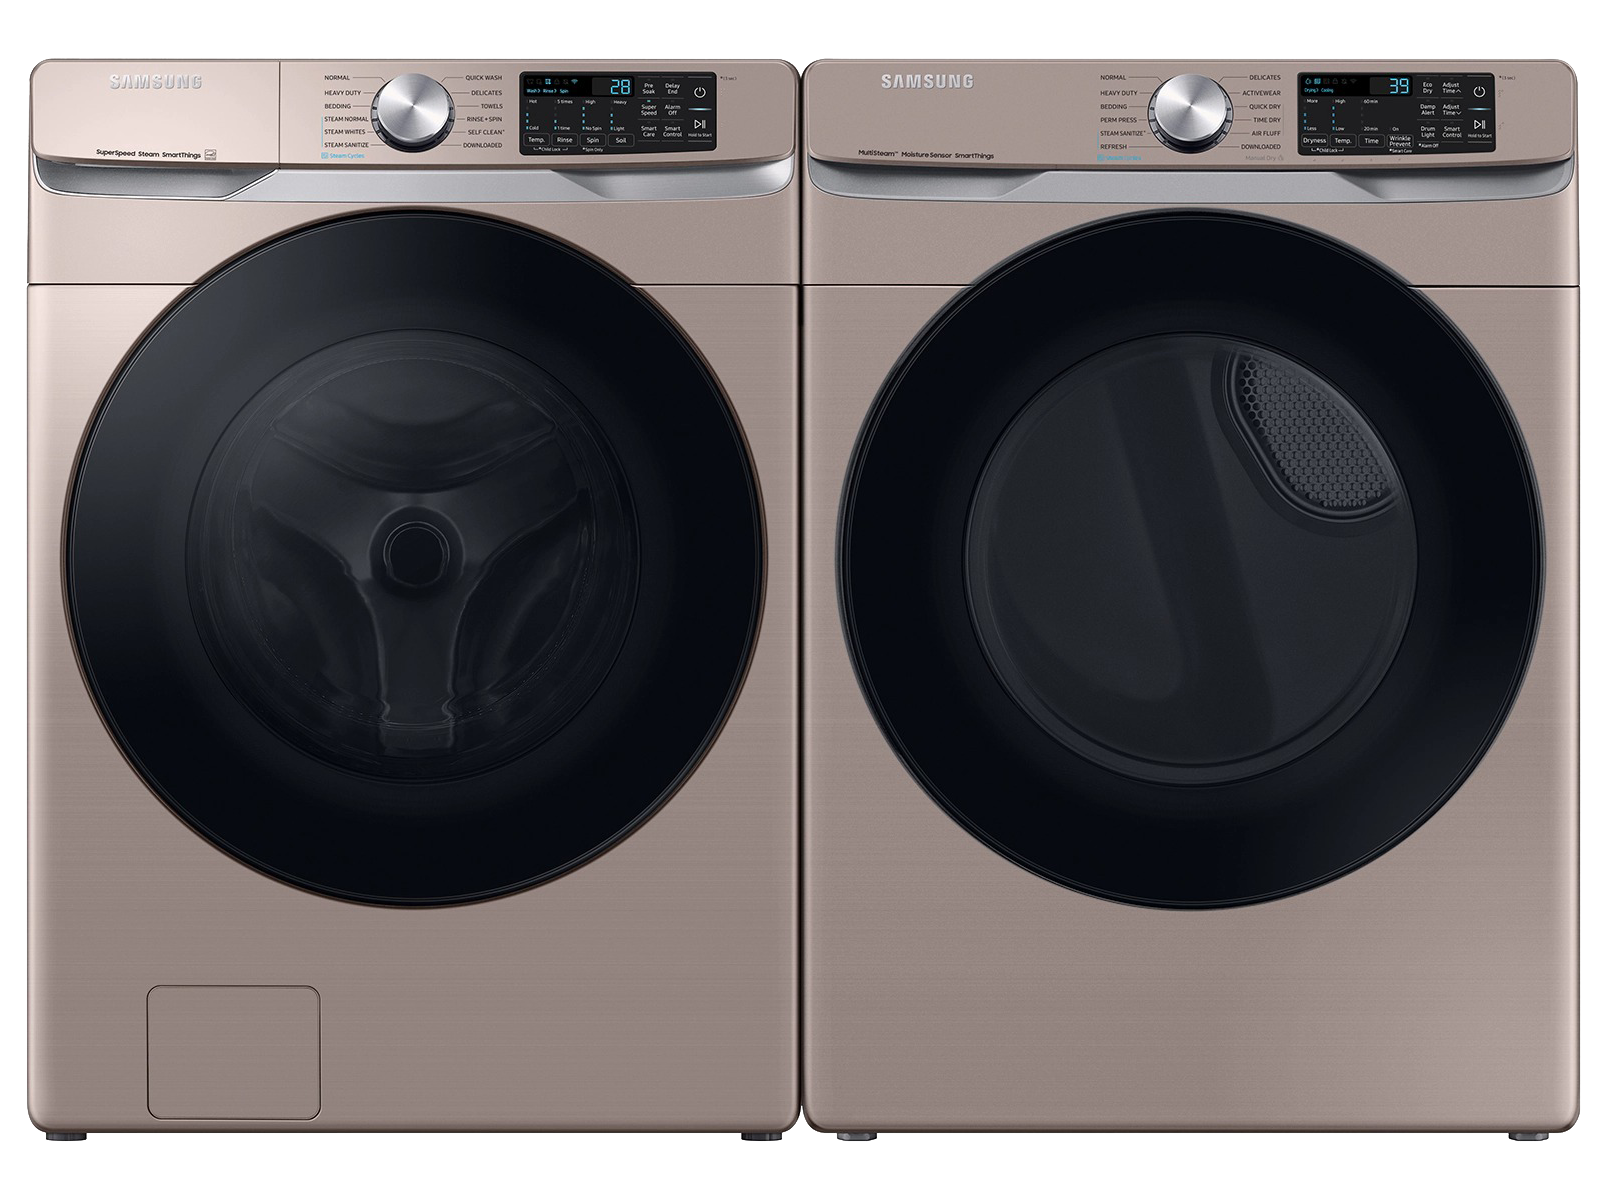 Large Capacity Smart Front Load Washer with Super Speed Wash & Smart Electric Dryer with Steam Sanitize+ in Champagne